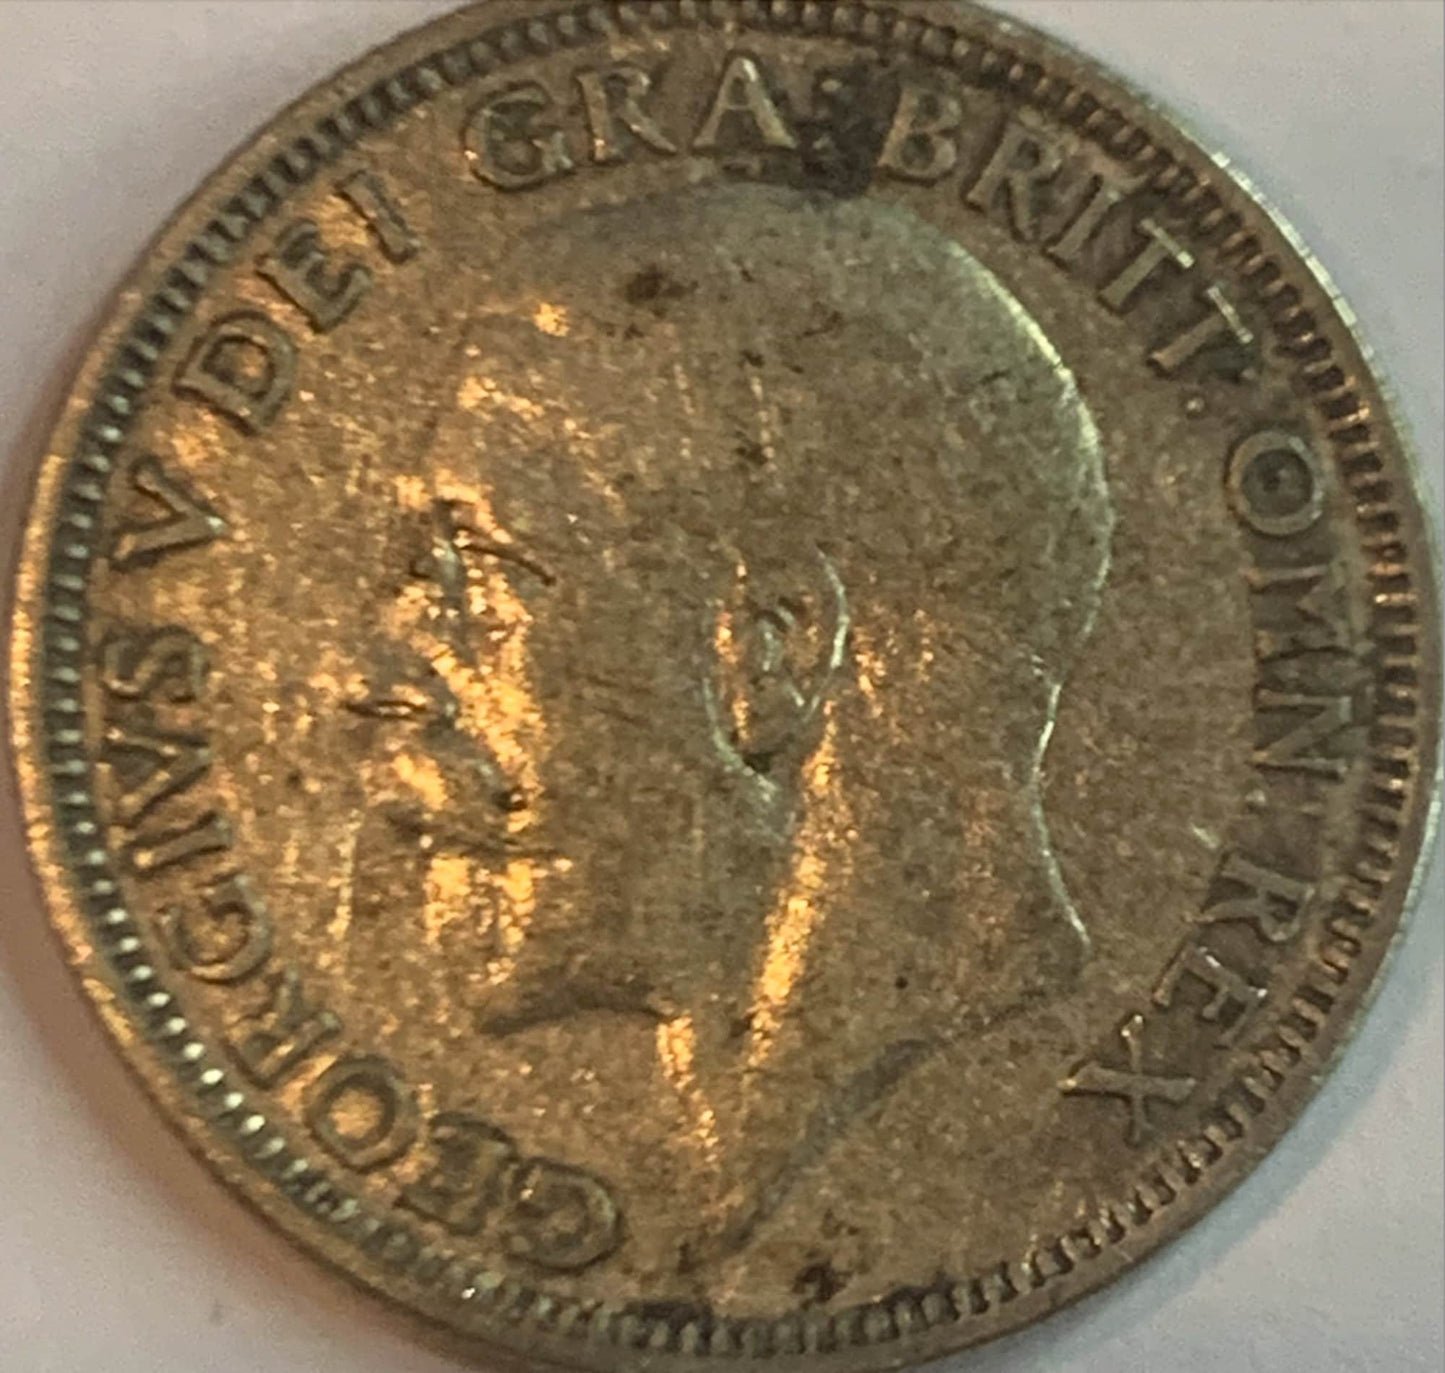 Rare 1928 United Kingdom 1 Shilling Coin - A Sterling Piece of British History"